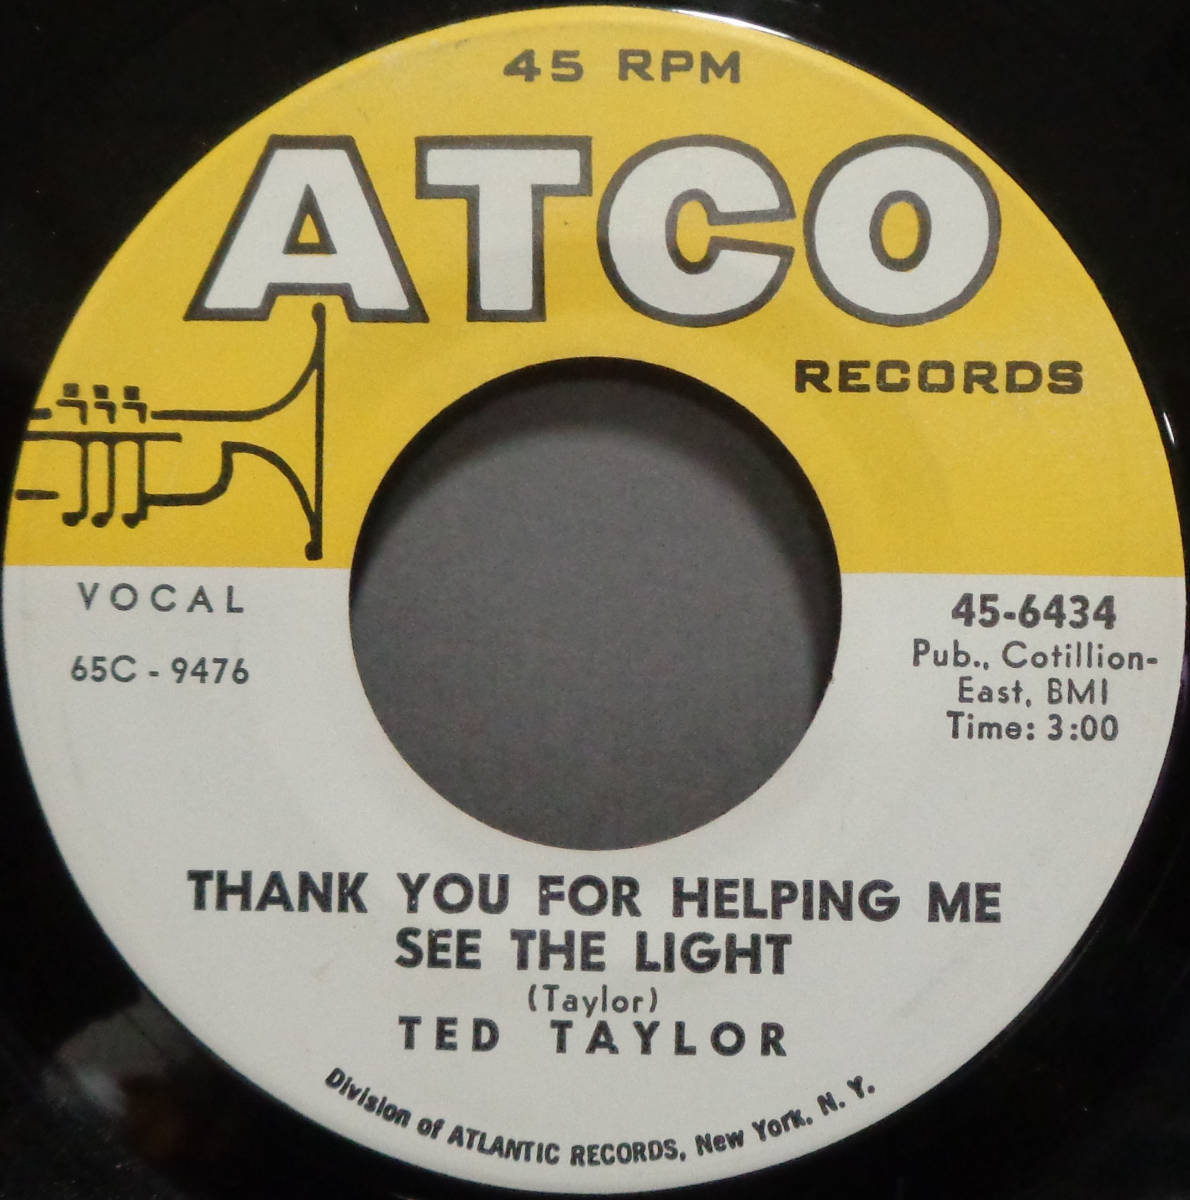 【SOUL 45】TED TAYLOR - THANK YOU FOR HELPING ME SEE THE LIGHT / HELP THE BEAR (s231106014)_画像1